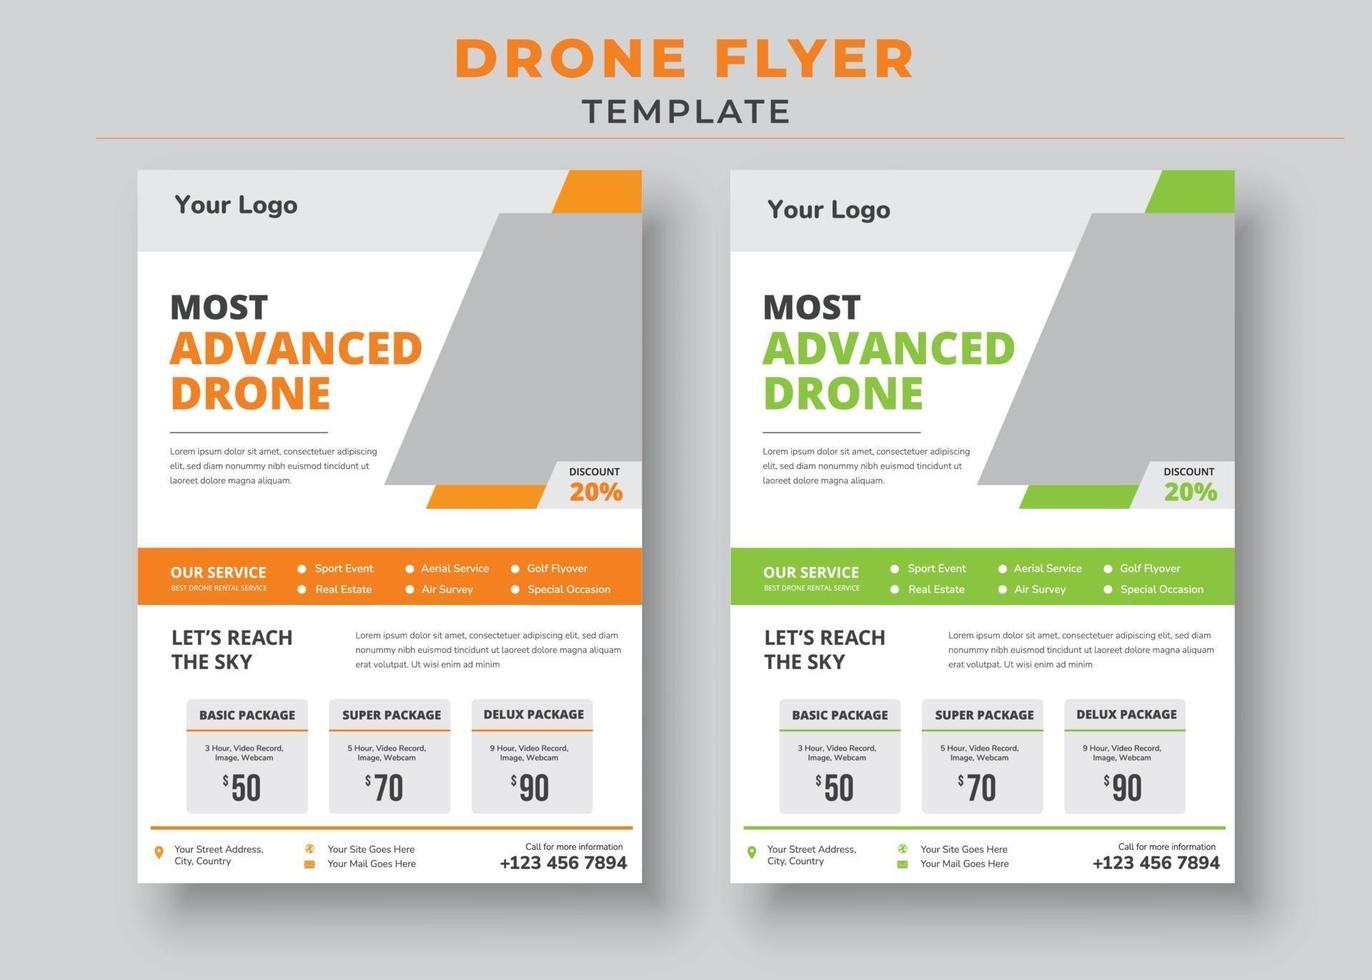 Drone Flyer Template, Most Advanced Drone Services Flyer vector